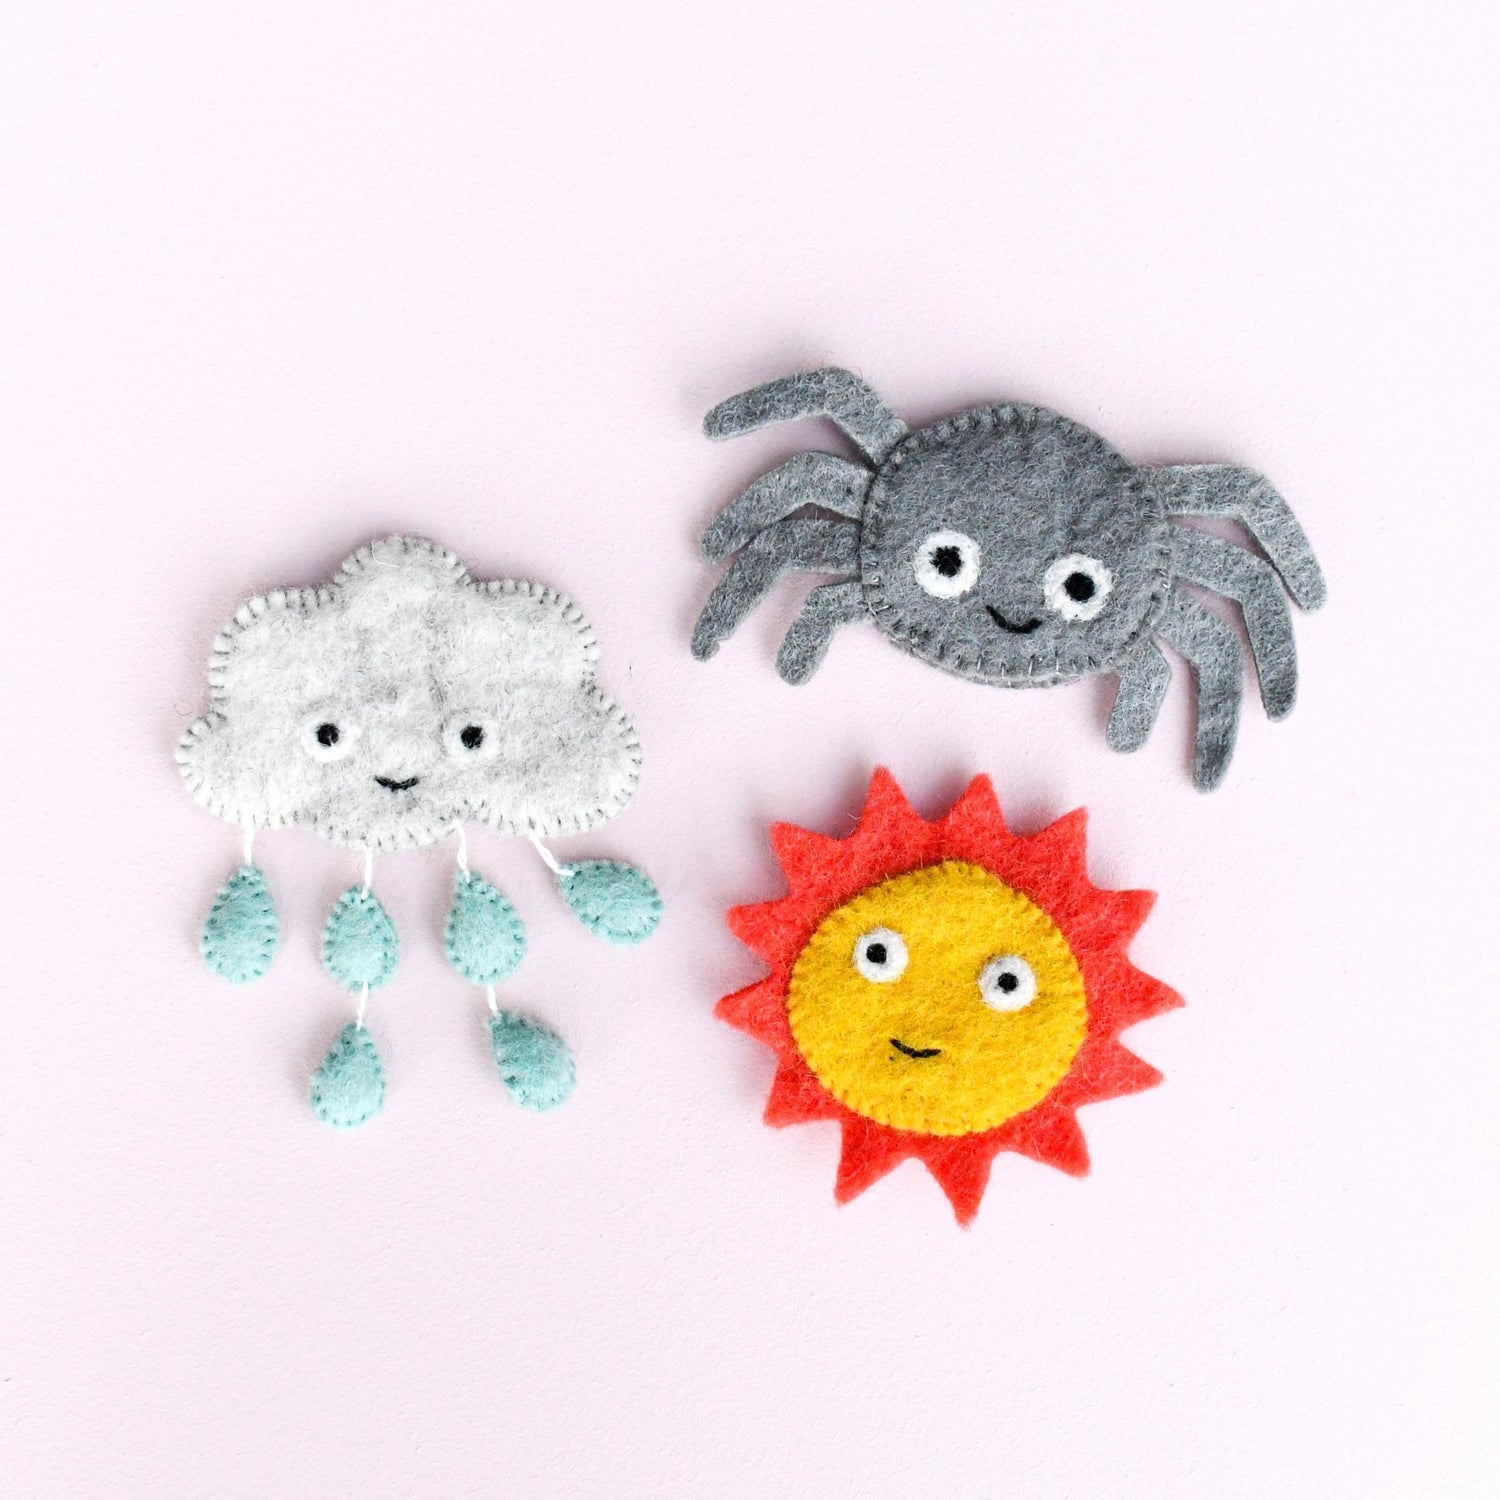 ITSY BITSY SPIDER (INCY WINCY SPIDER) FINGER PUPPET SET by TARA TREASURES - The Playful Collective